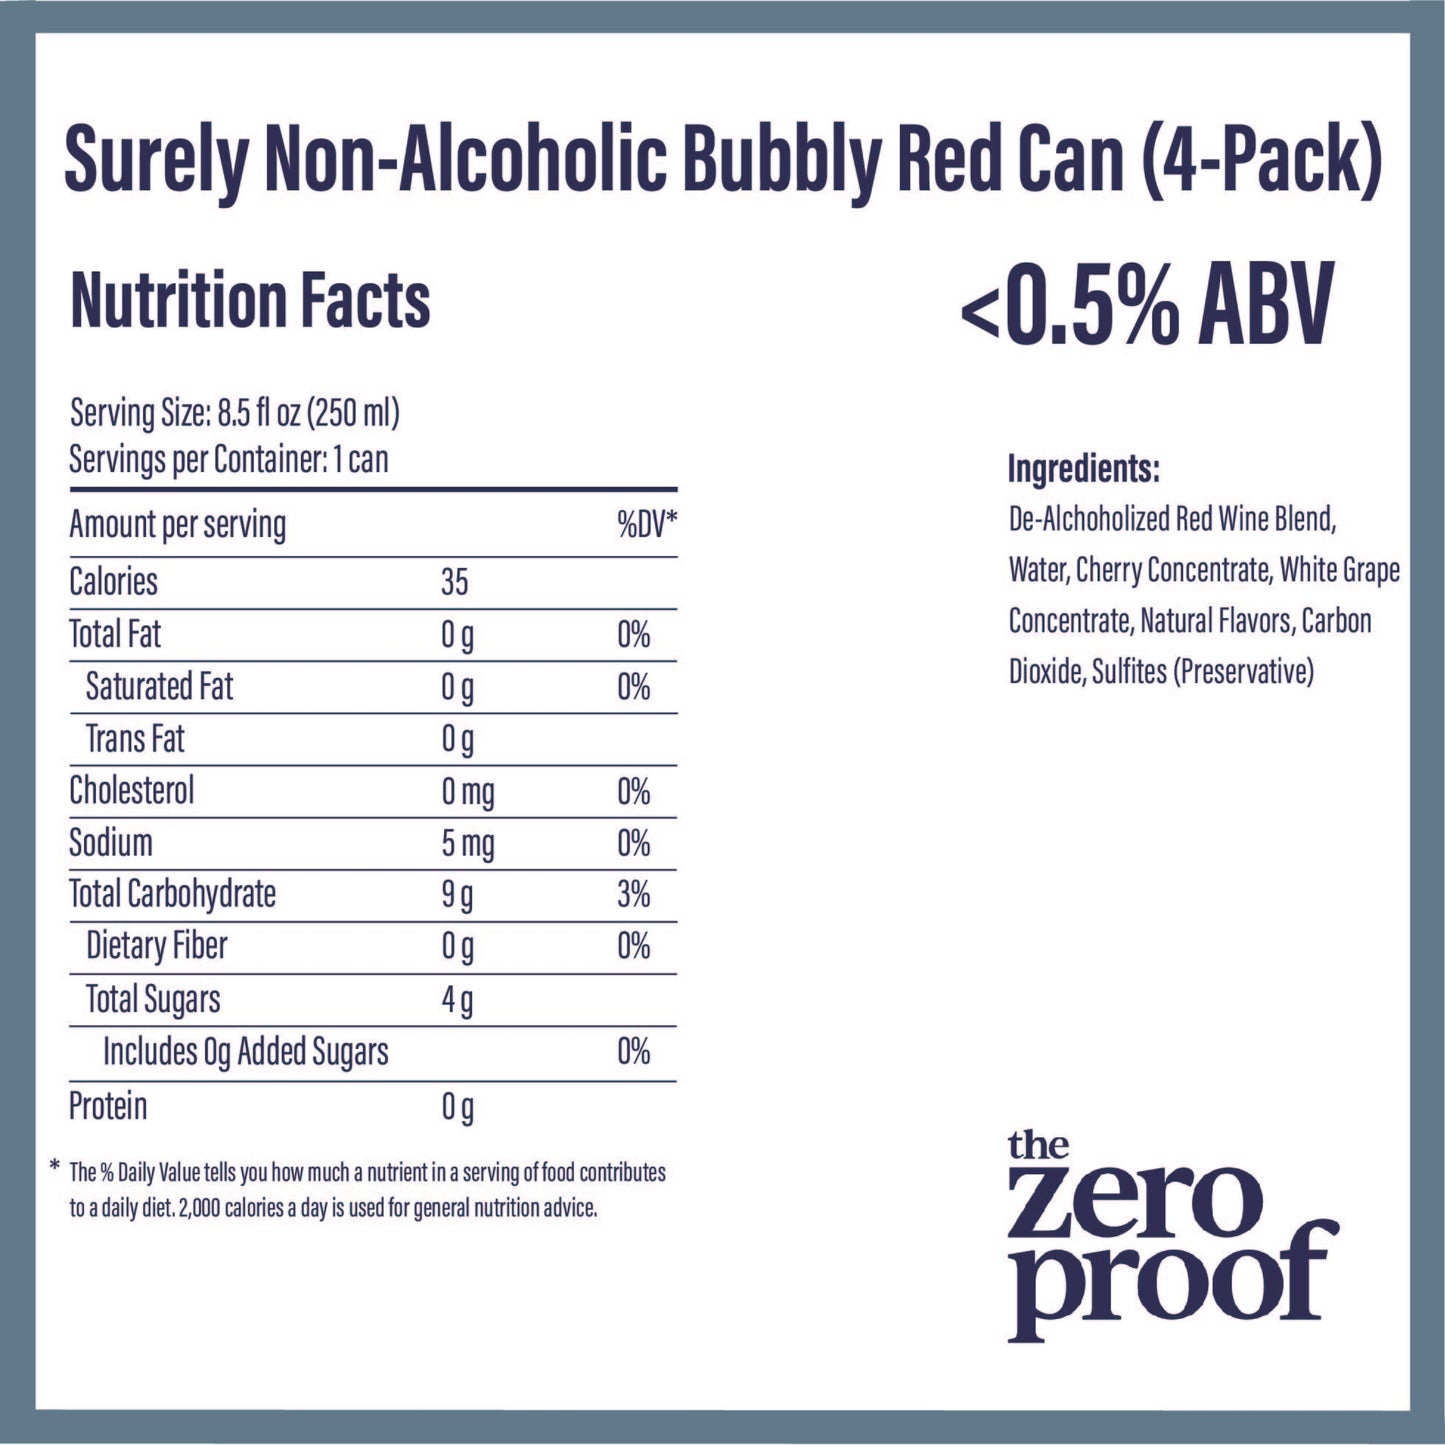 Surely Non-Alcoholic Bubbly Red Can (4-Pack)